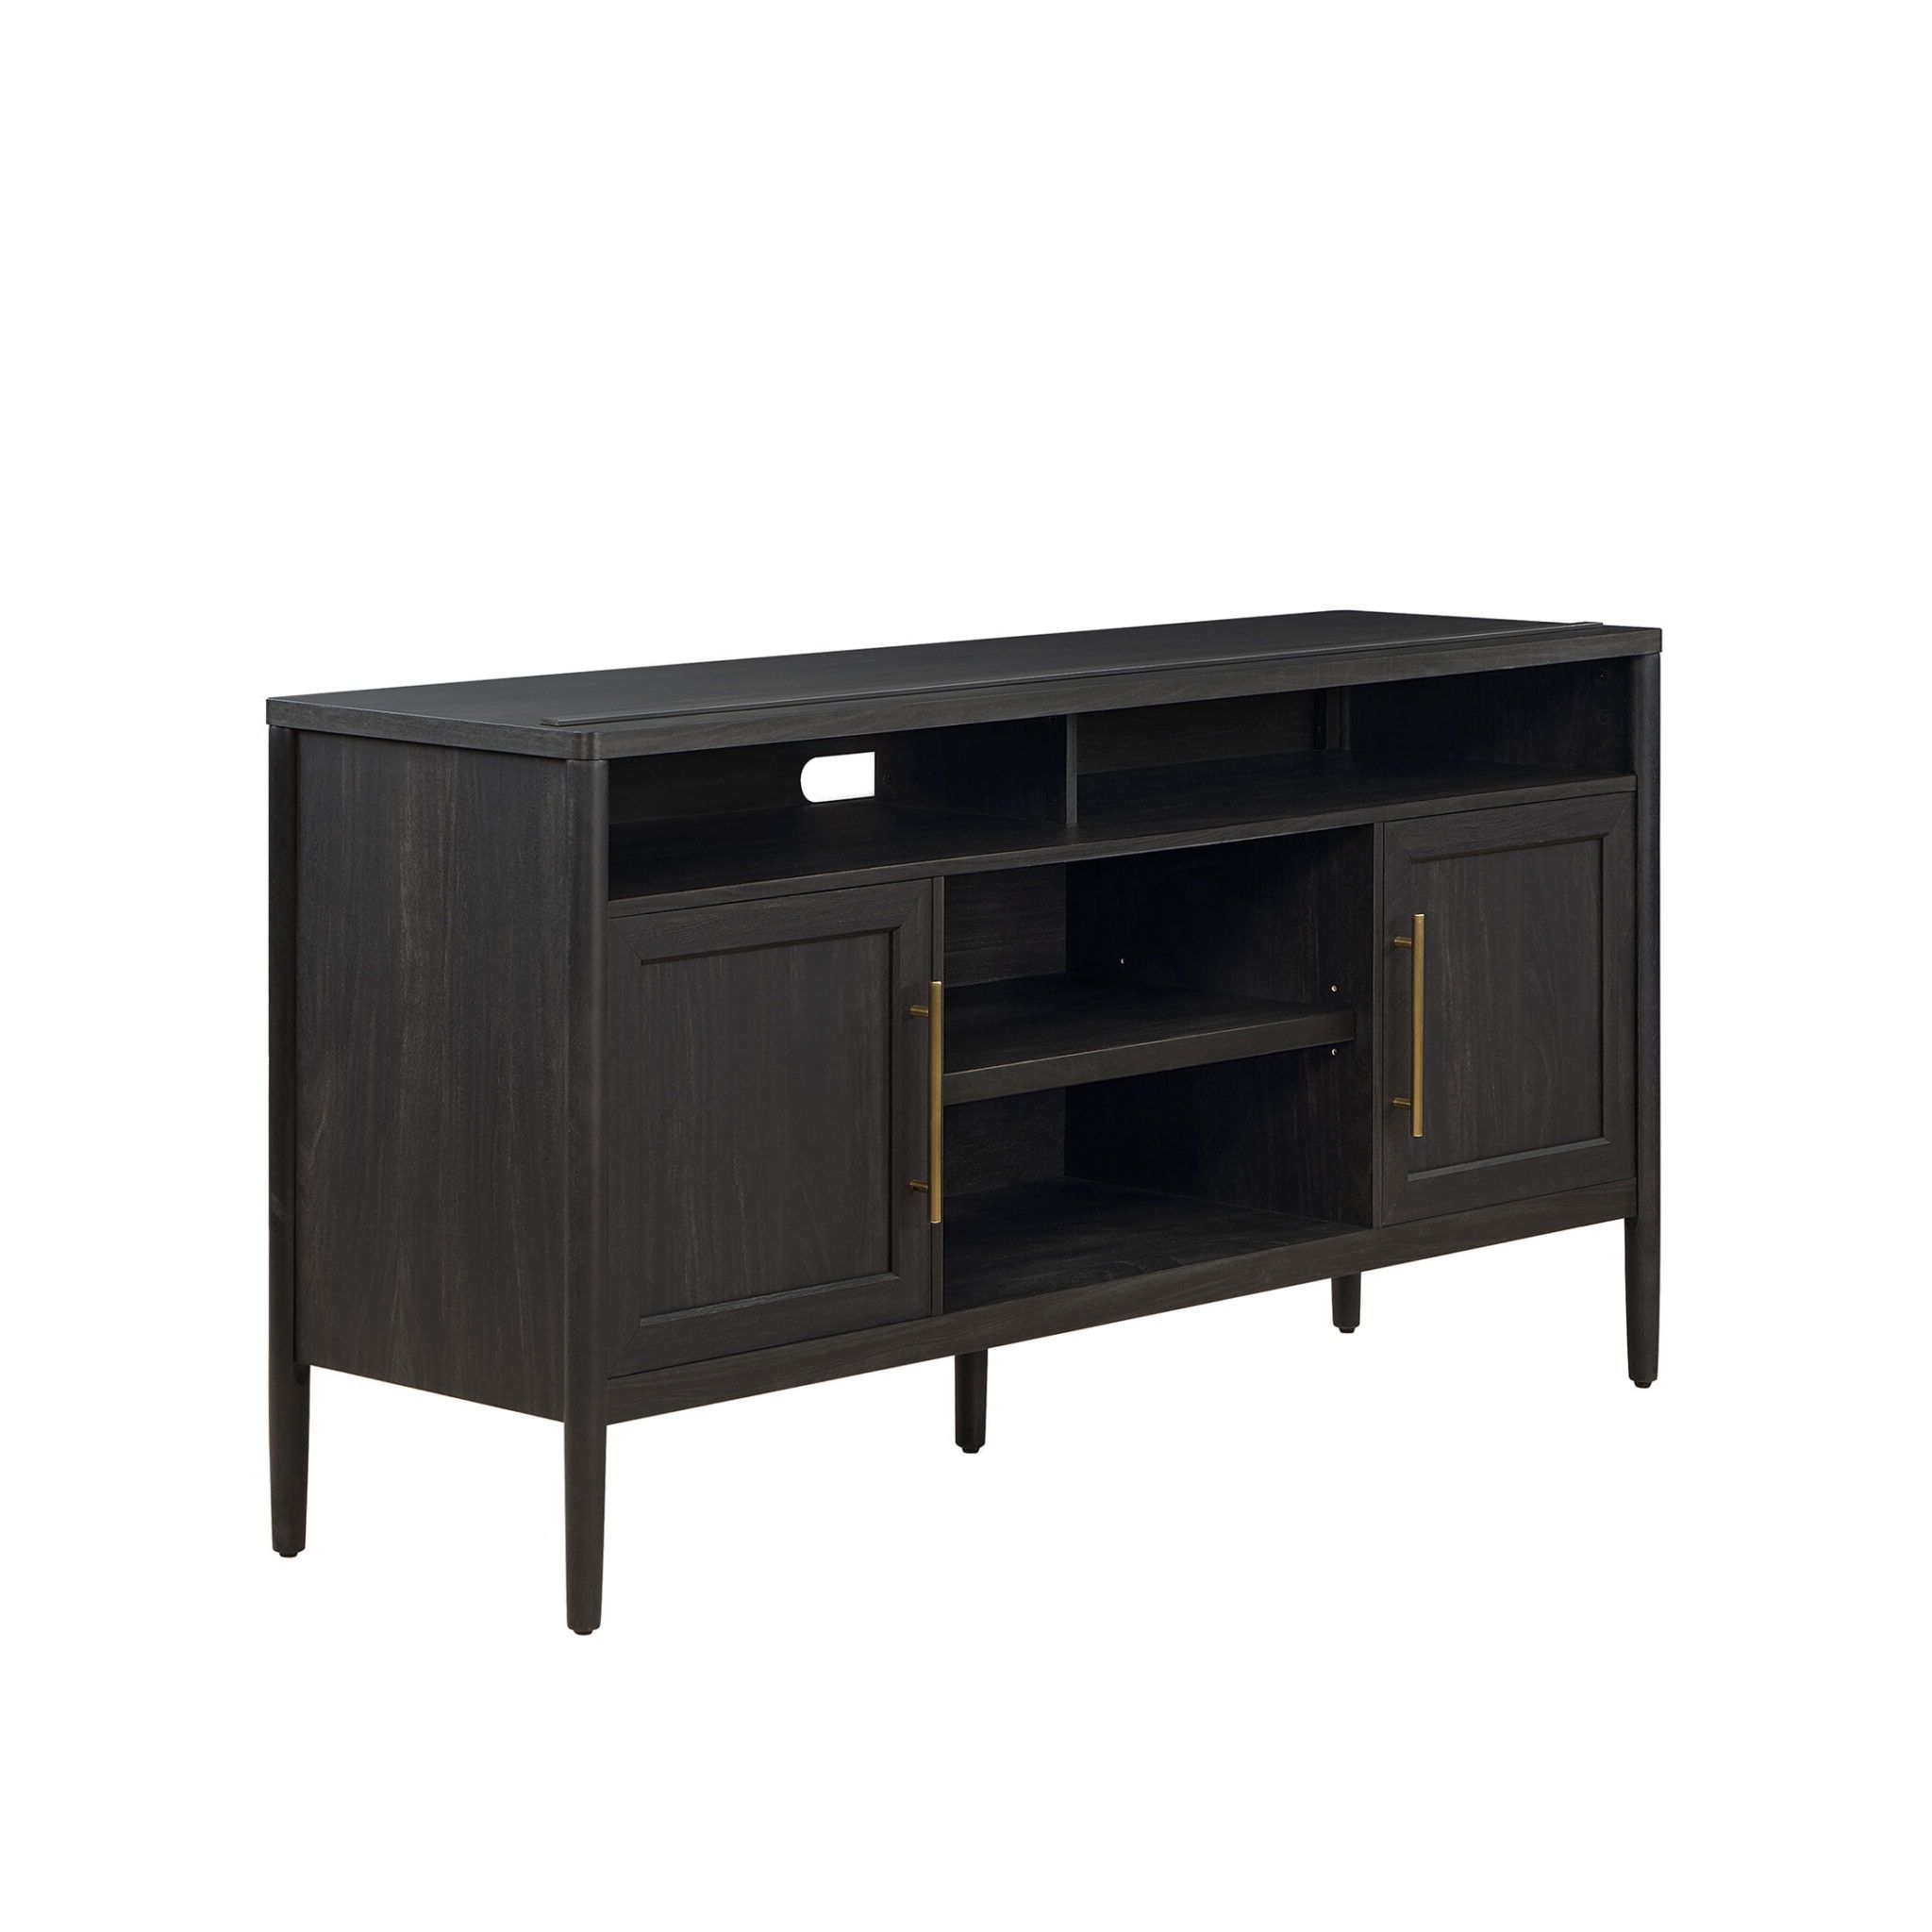 Preferred Oaklee Tv Stands Regarding Better Homes & Gardens Oaklee Tv Stand For Tvs Up To 70”, Charcoal (View 9 of 15)